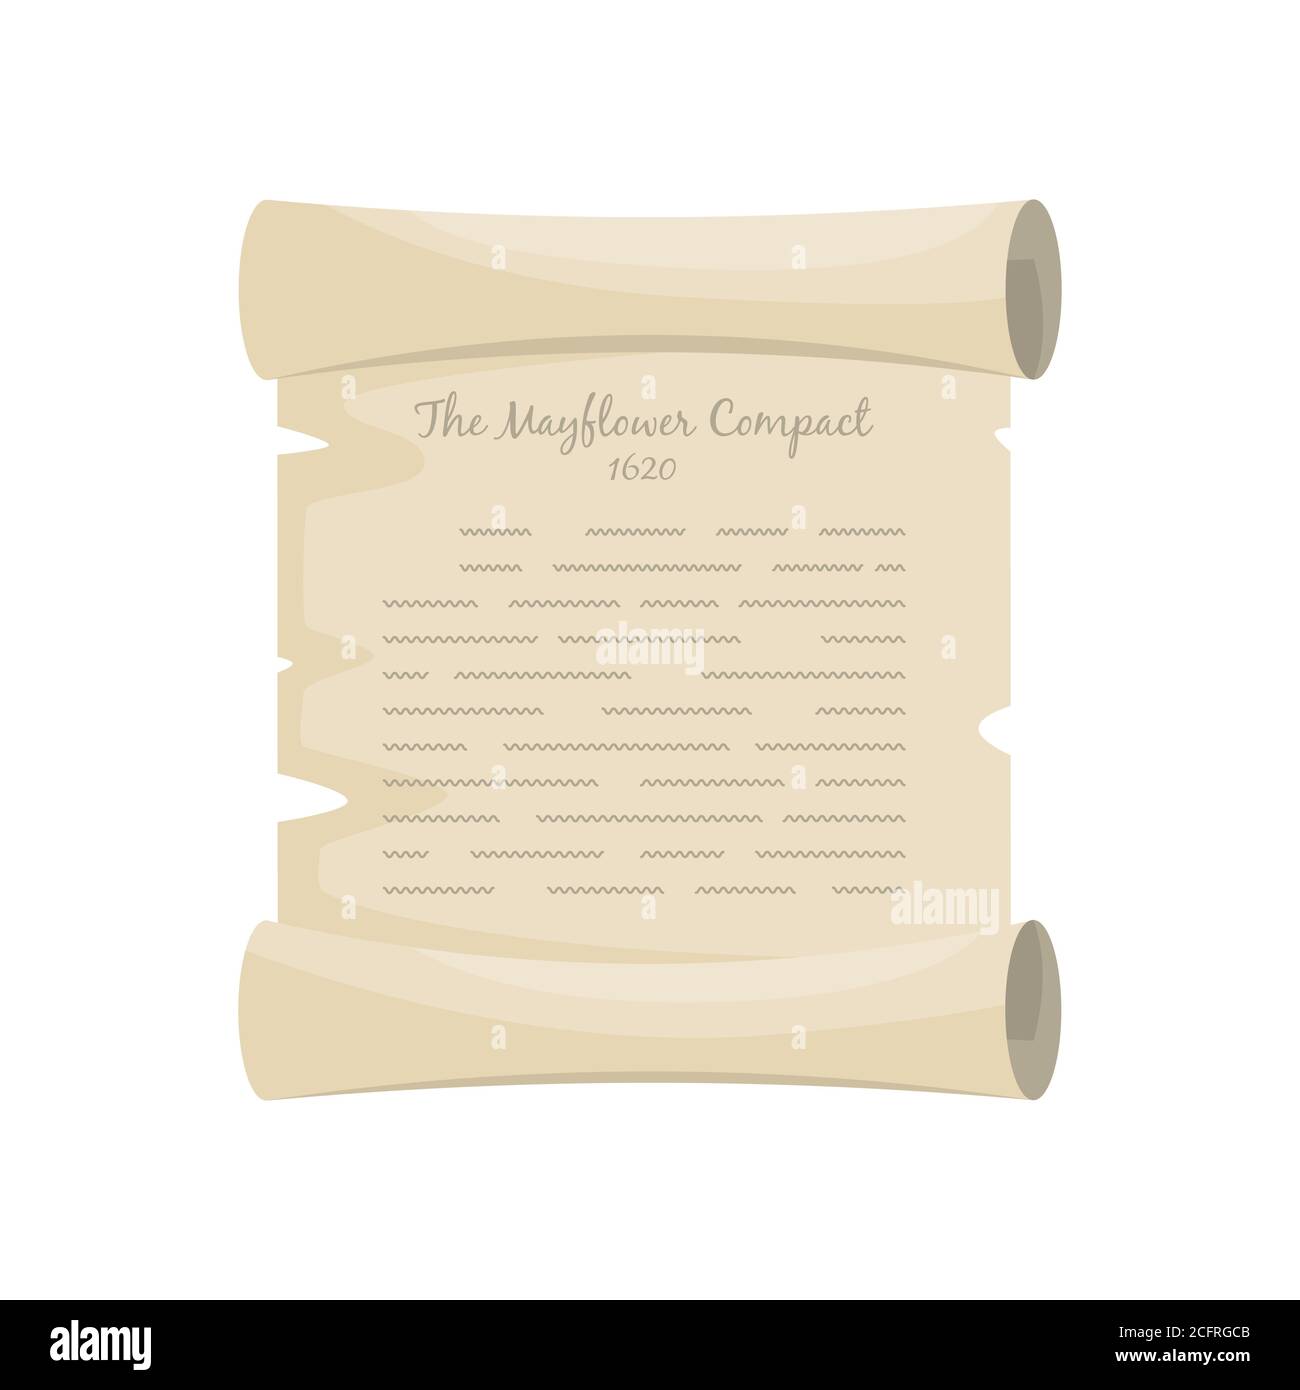 The Mayflower Compact 1620 old pergament. Cartoon vector illustration for Thanksgiving holiday. Stock Vector